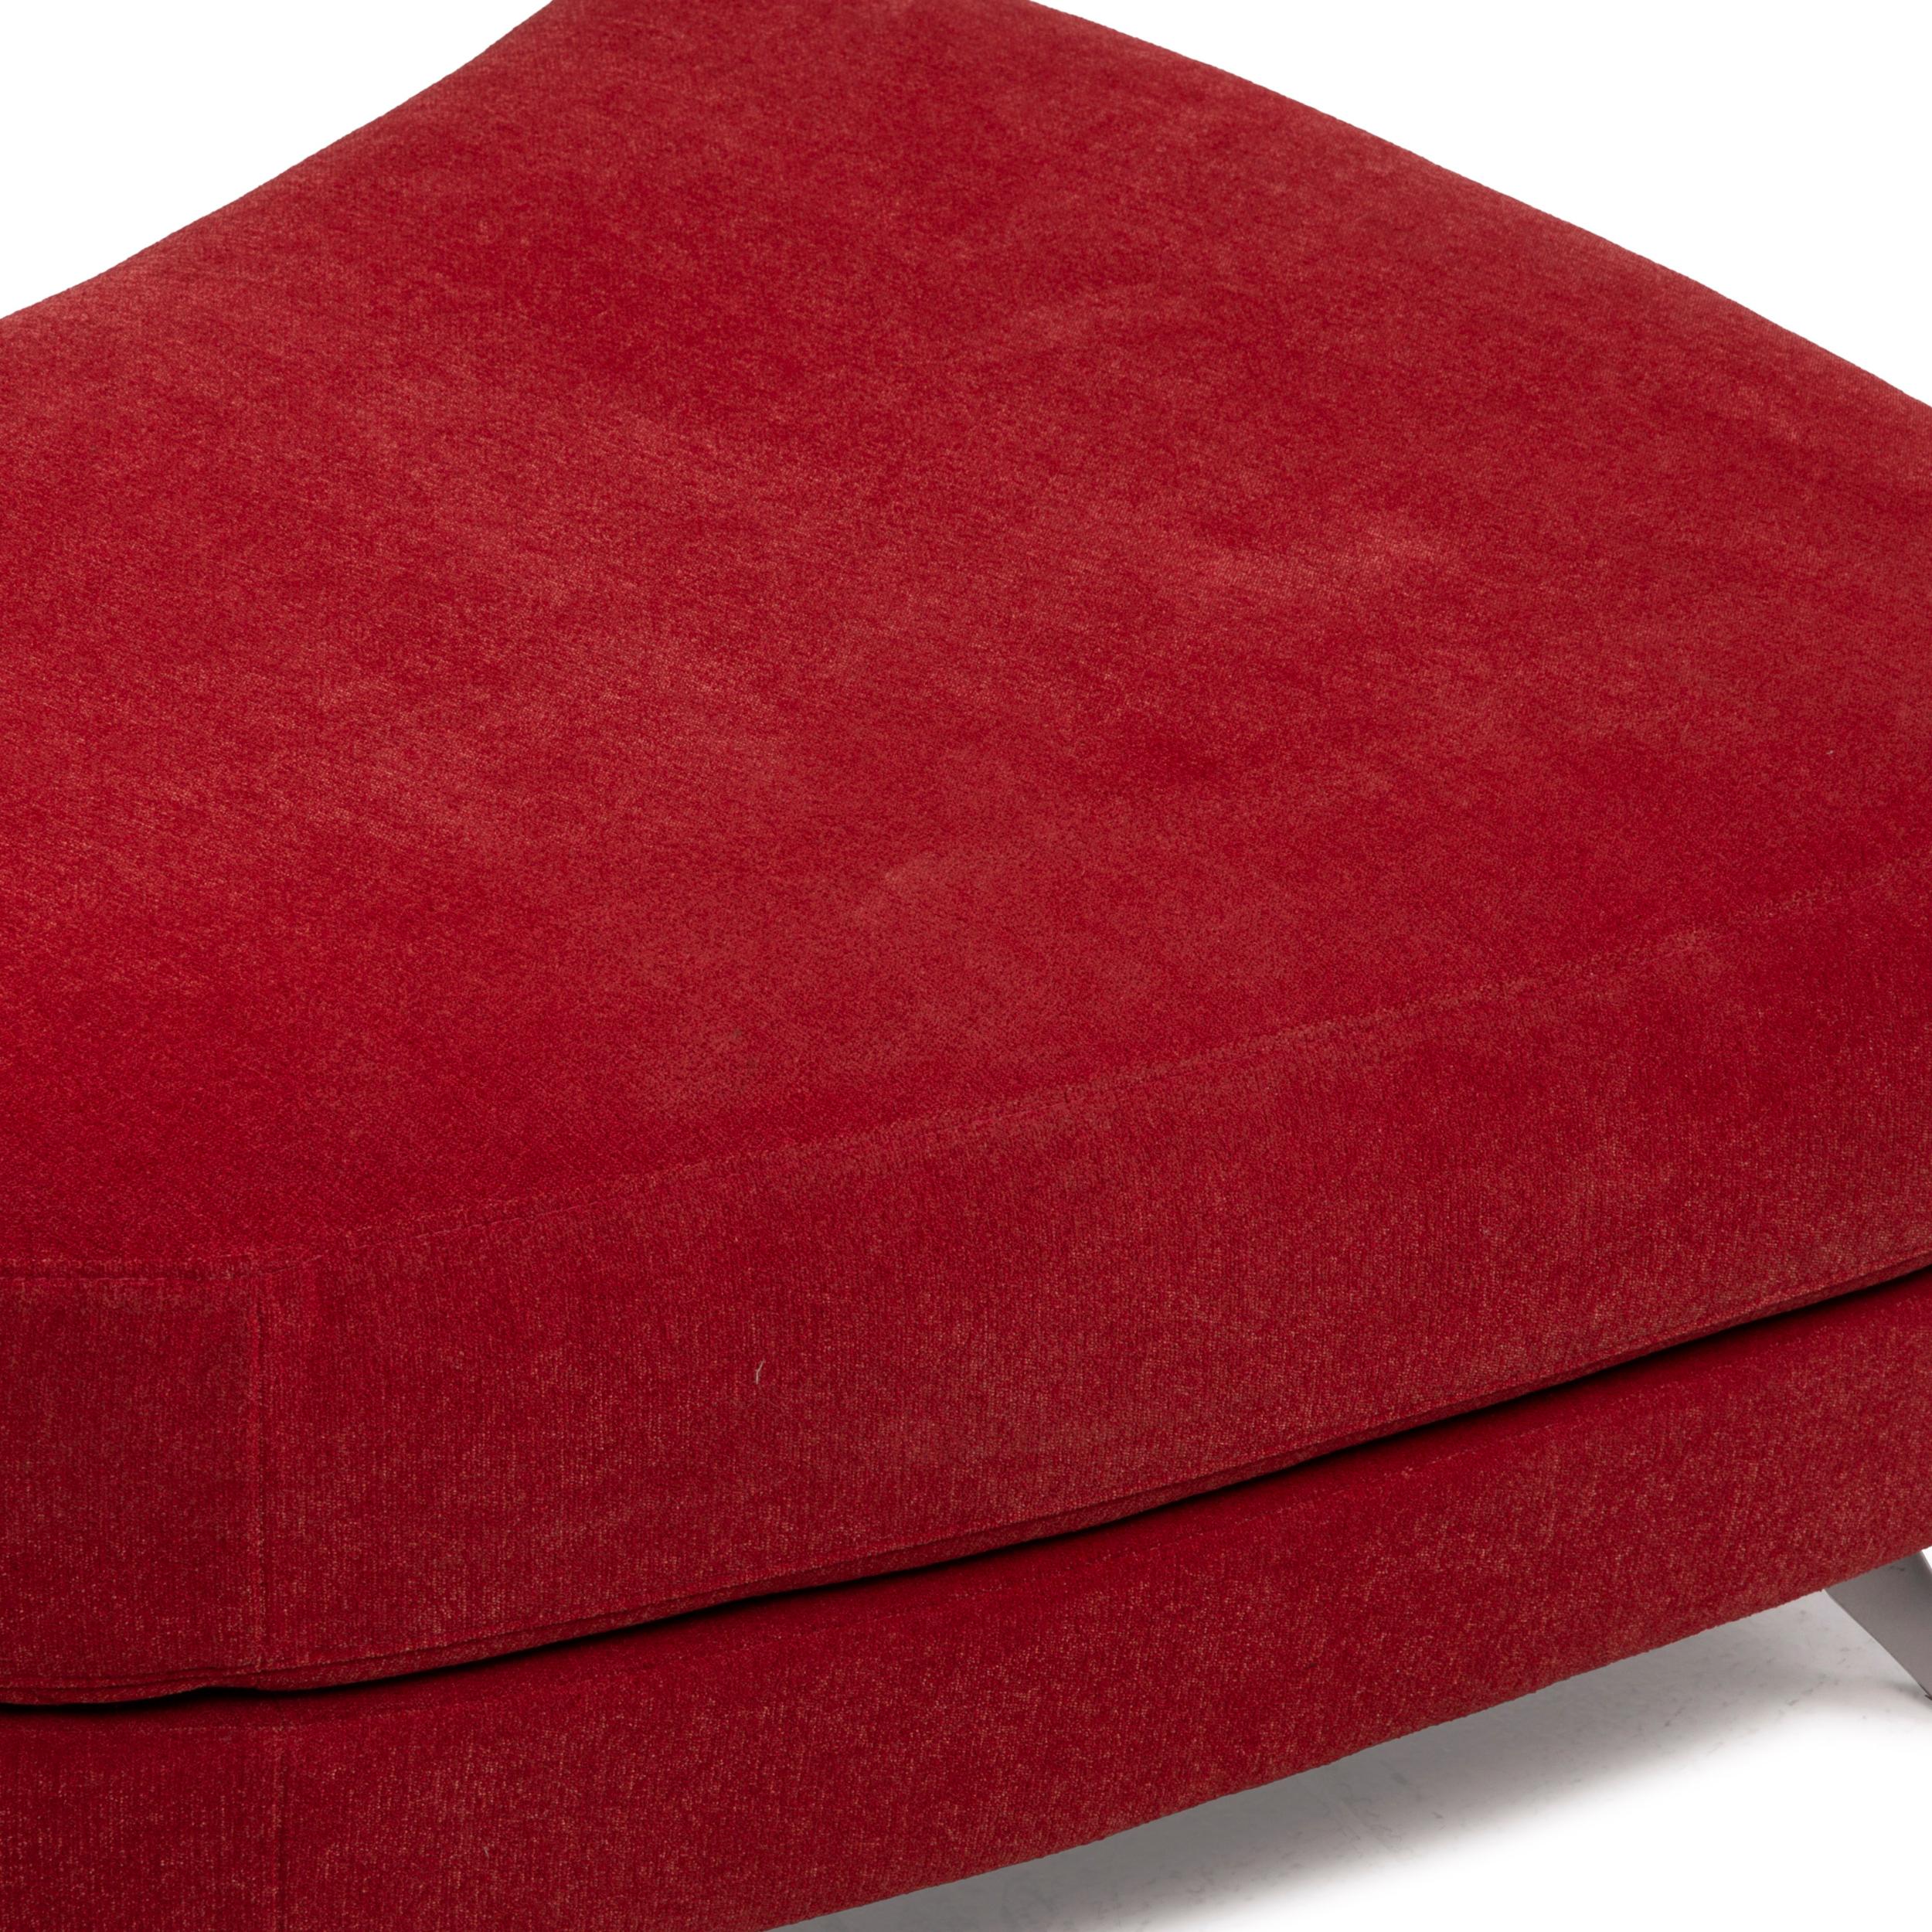 Rolf Benz 2500 Red Three-Seater Fabric Sofa Incl. Ottoman Set 6